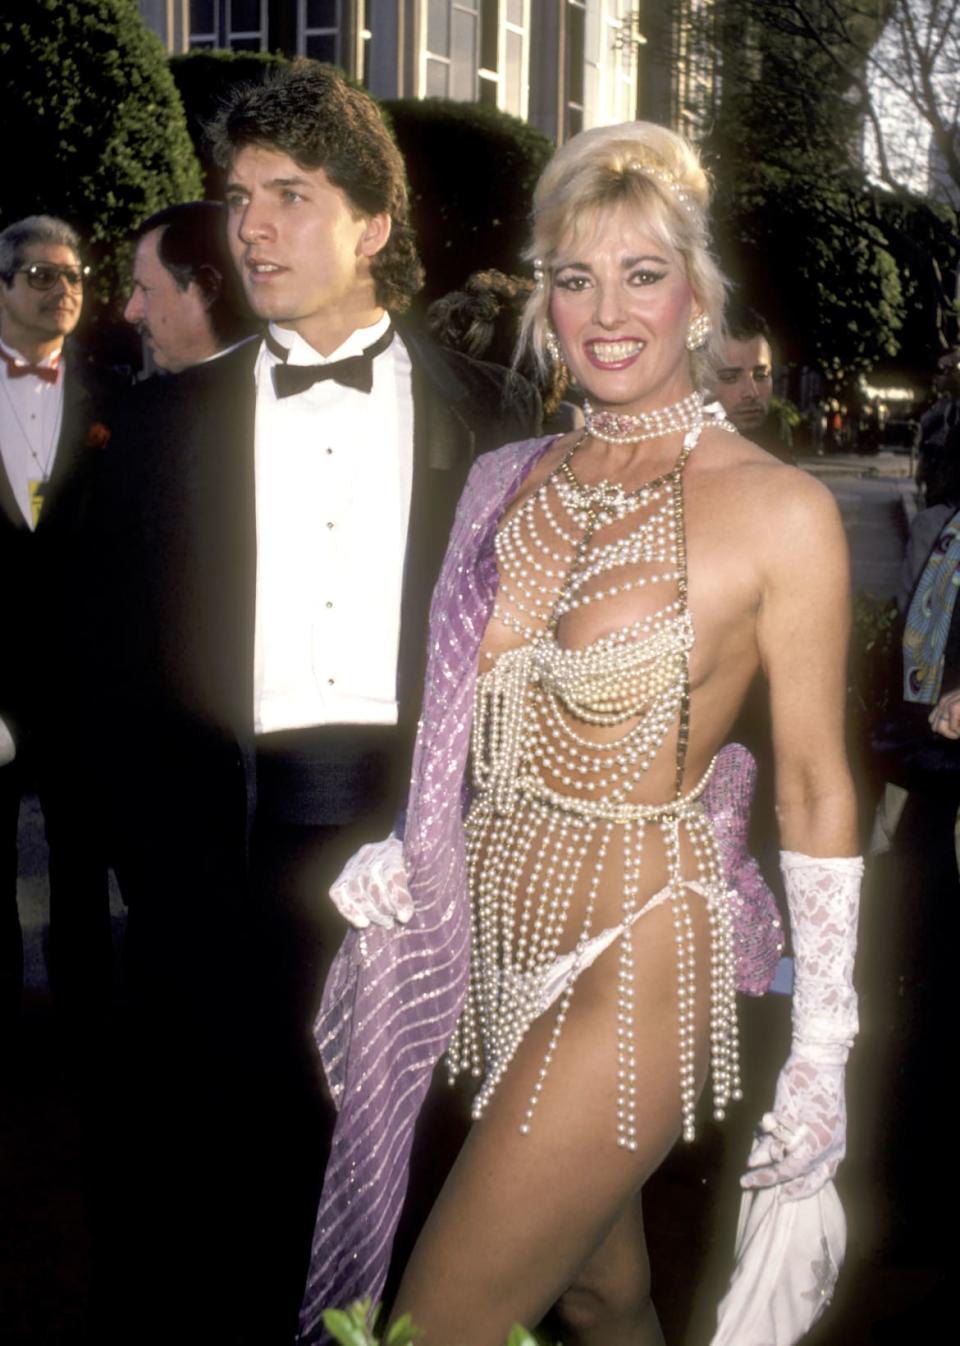 <div class="inline-image__caption"><p>Edy Williams at the 58th Annual Academy Awards on March 24, 1986 at Dorothy Chandler Pavilion in Los Angeles, California.</p></div> <div class="inline-image__credit">Ron Galella/Getty</div>